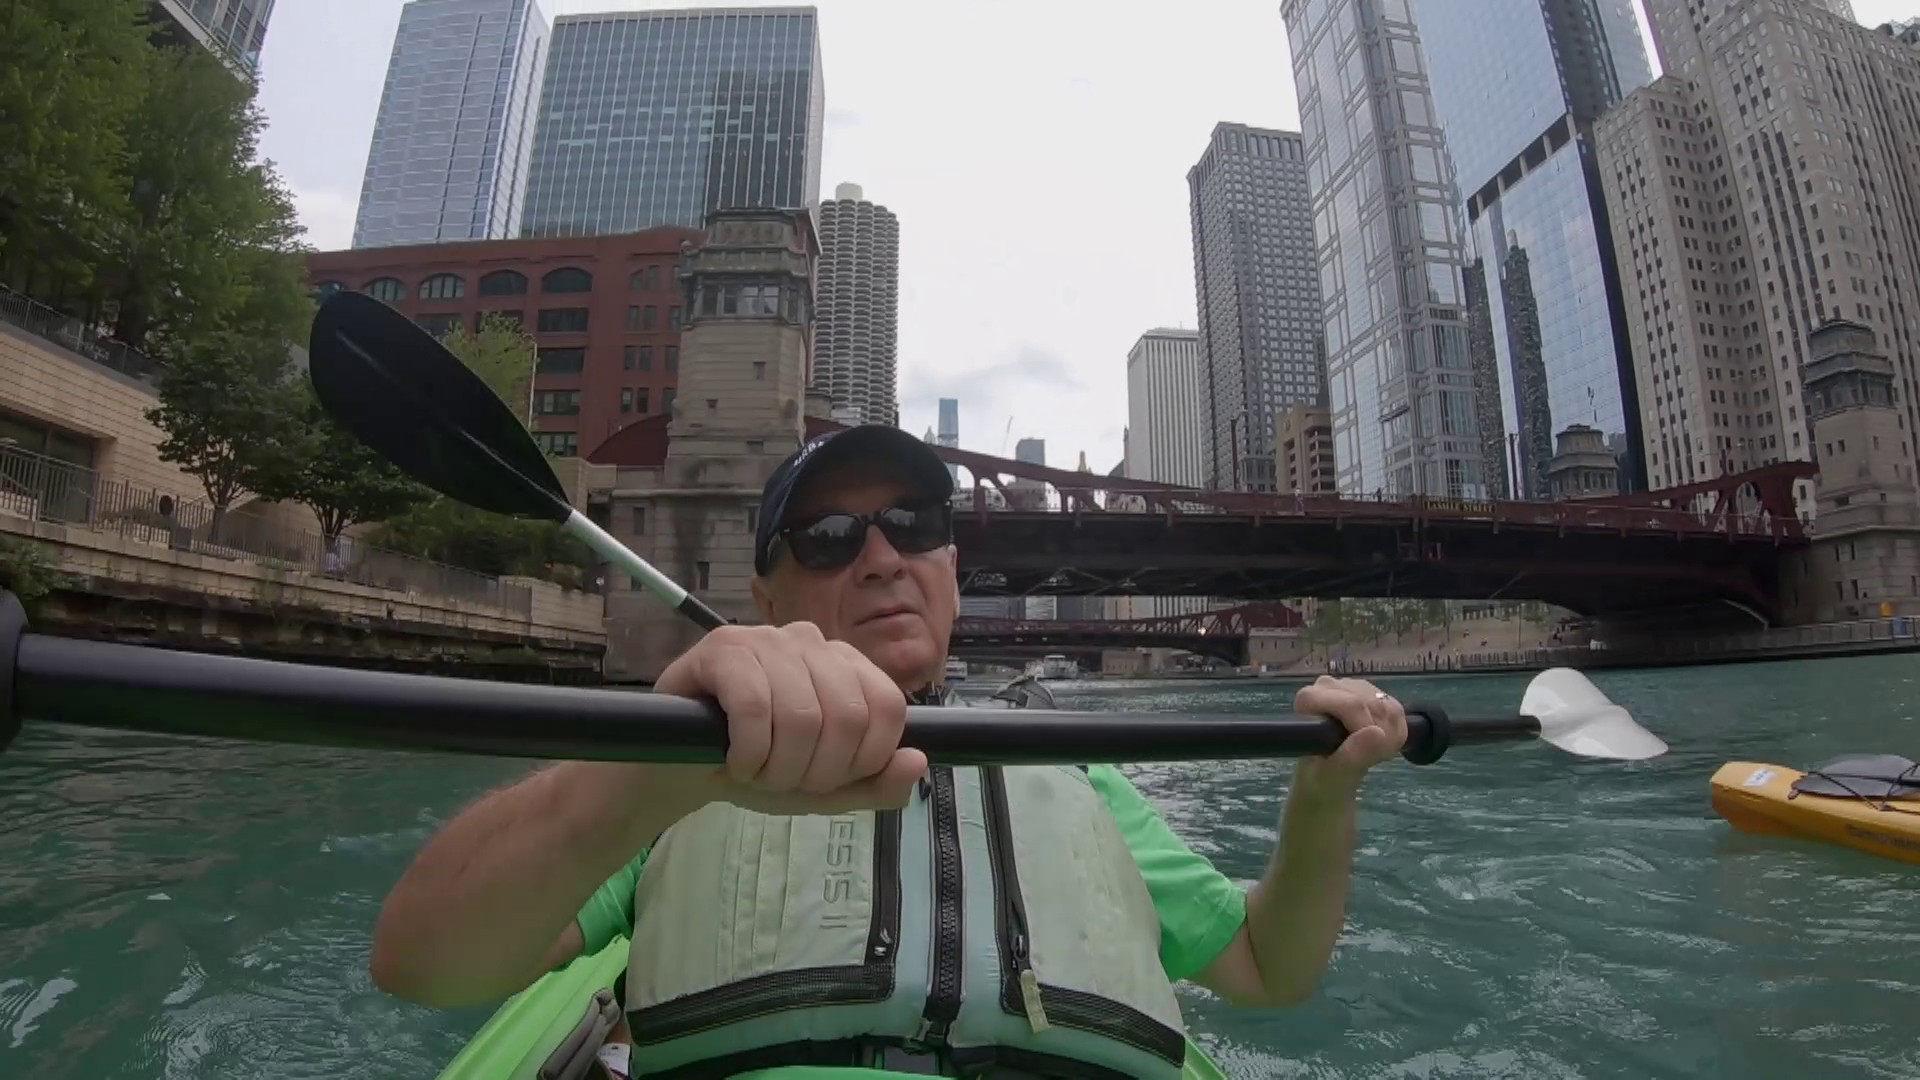 Chuck's Big Adventure takes us to Chicago!